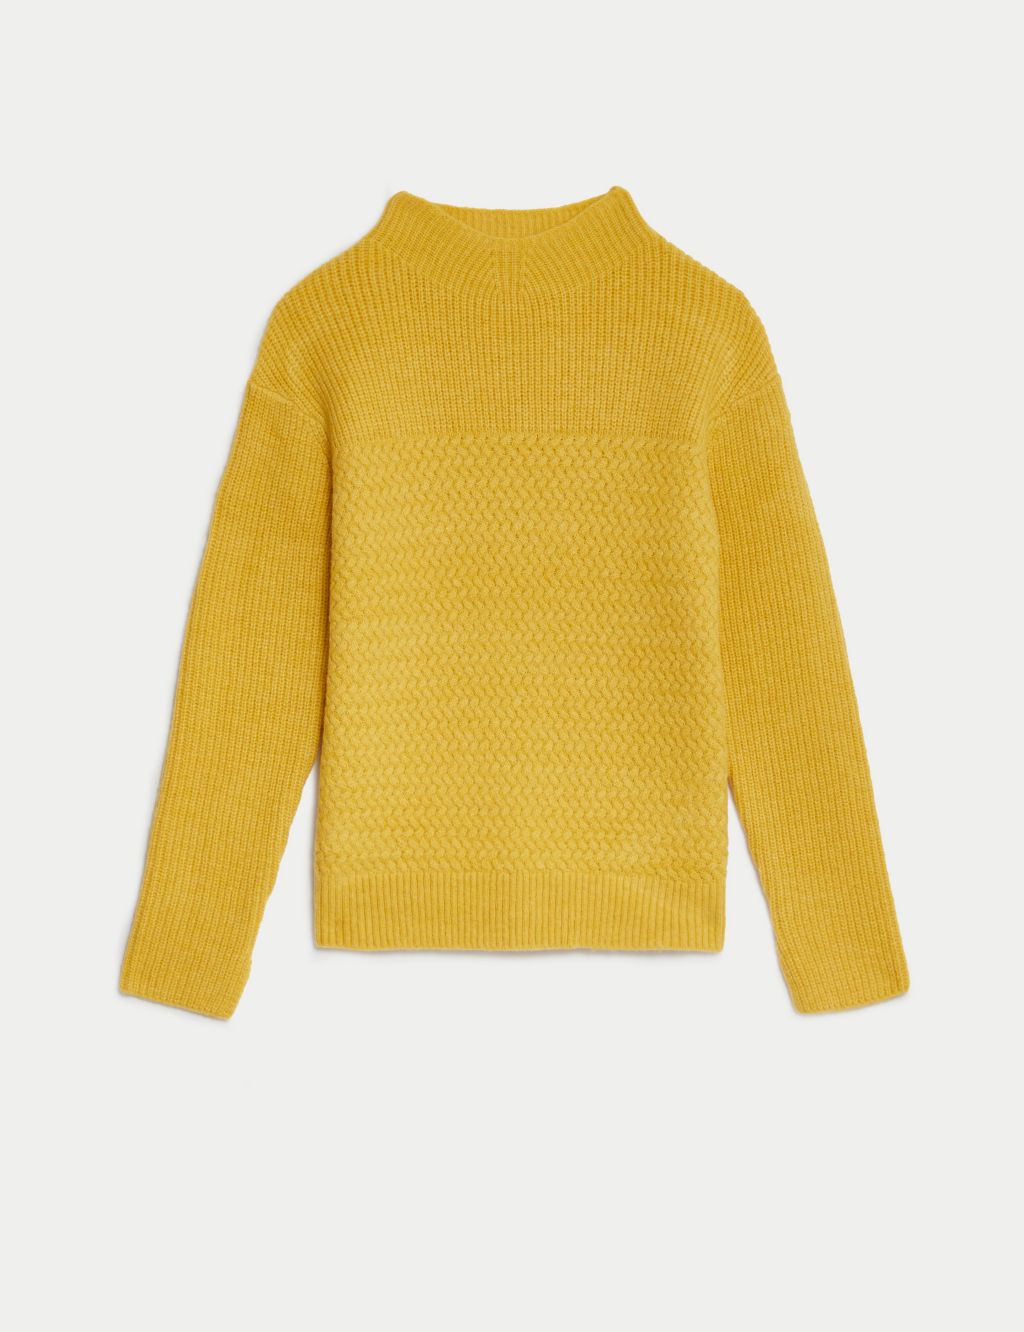 Funnel Neck Jumper with Wool image 2